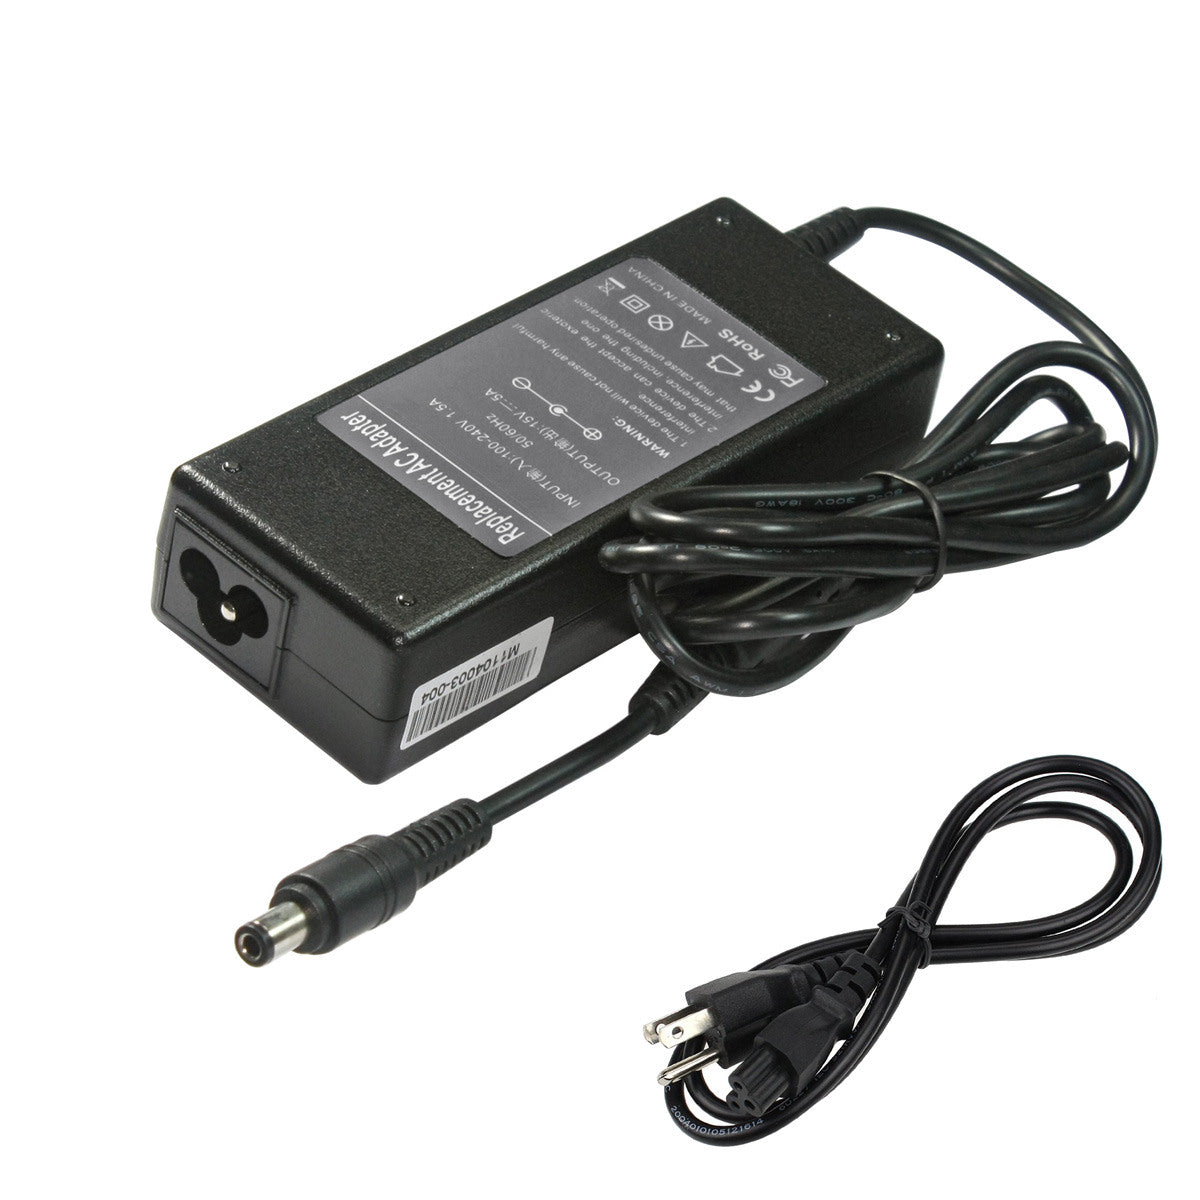 Compatible Designed Toshiba Satellite 1415-S115 Charger.